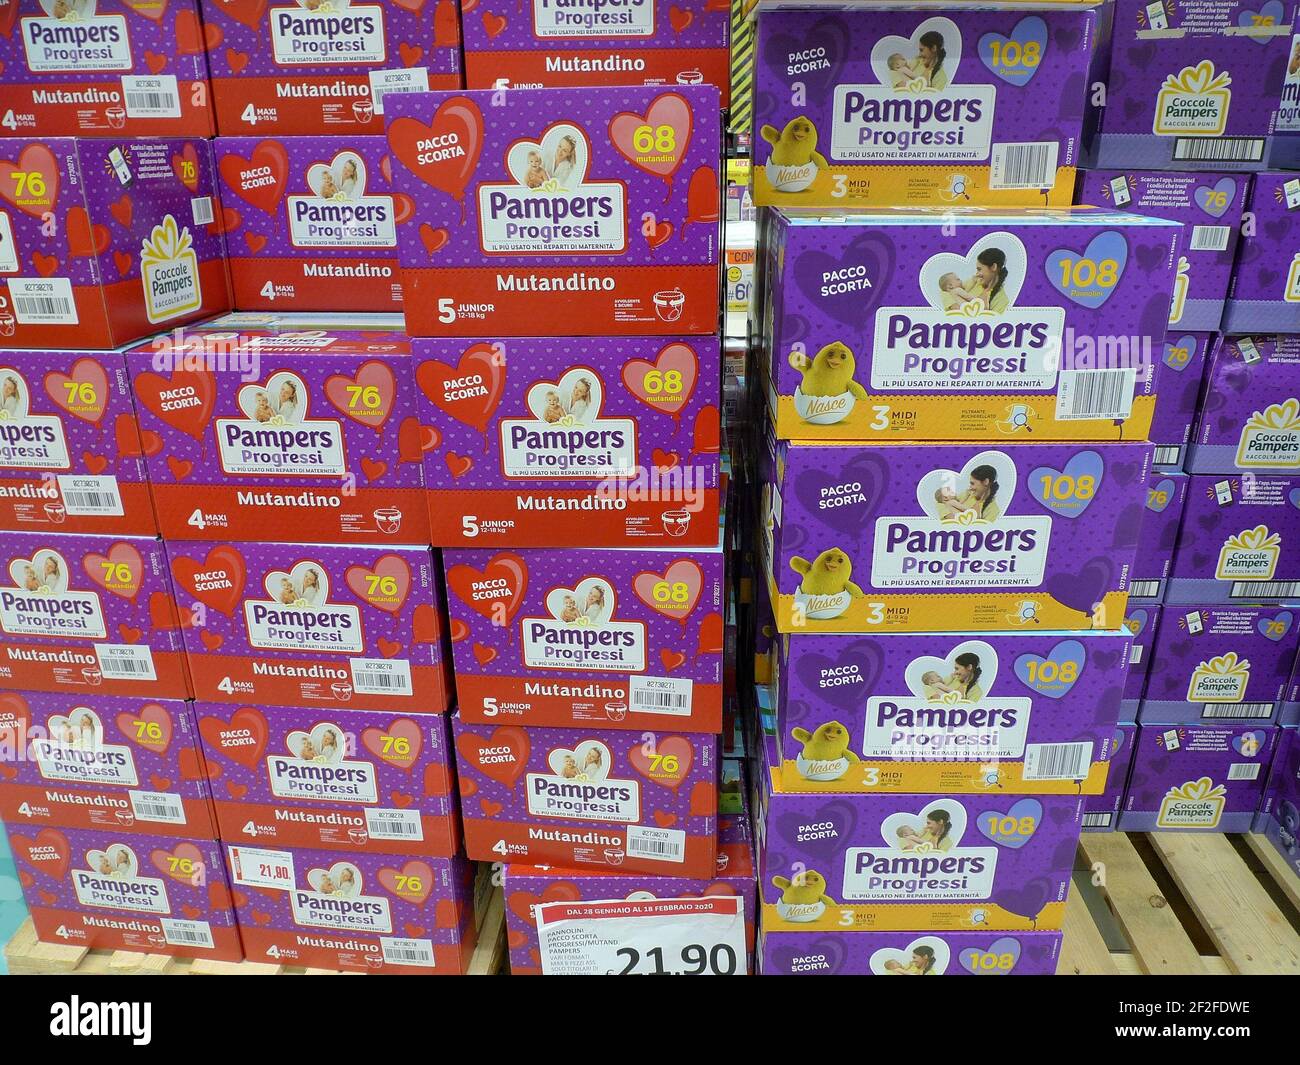 Pampers High Resolution Stock Photography and Images - Alamy